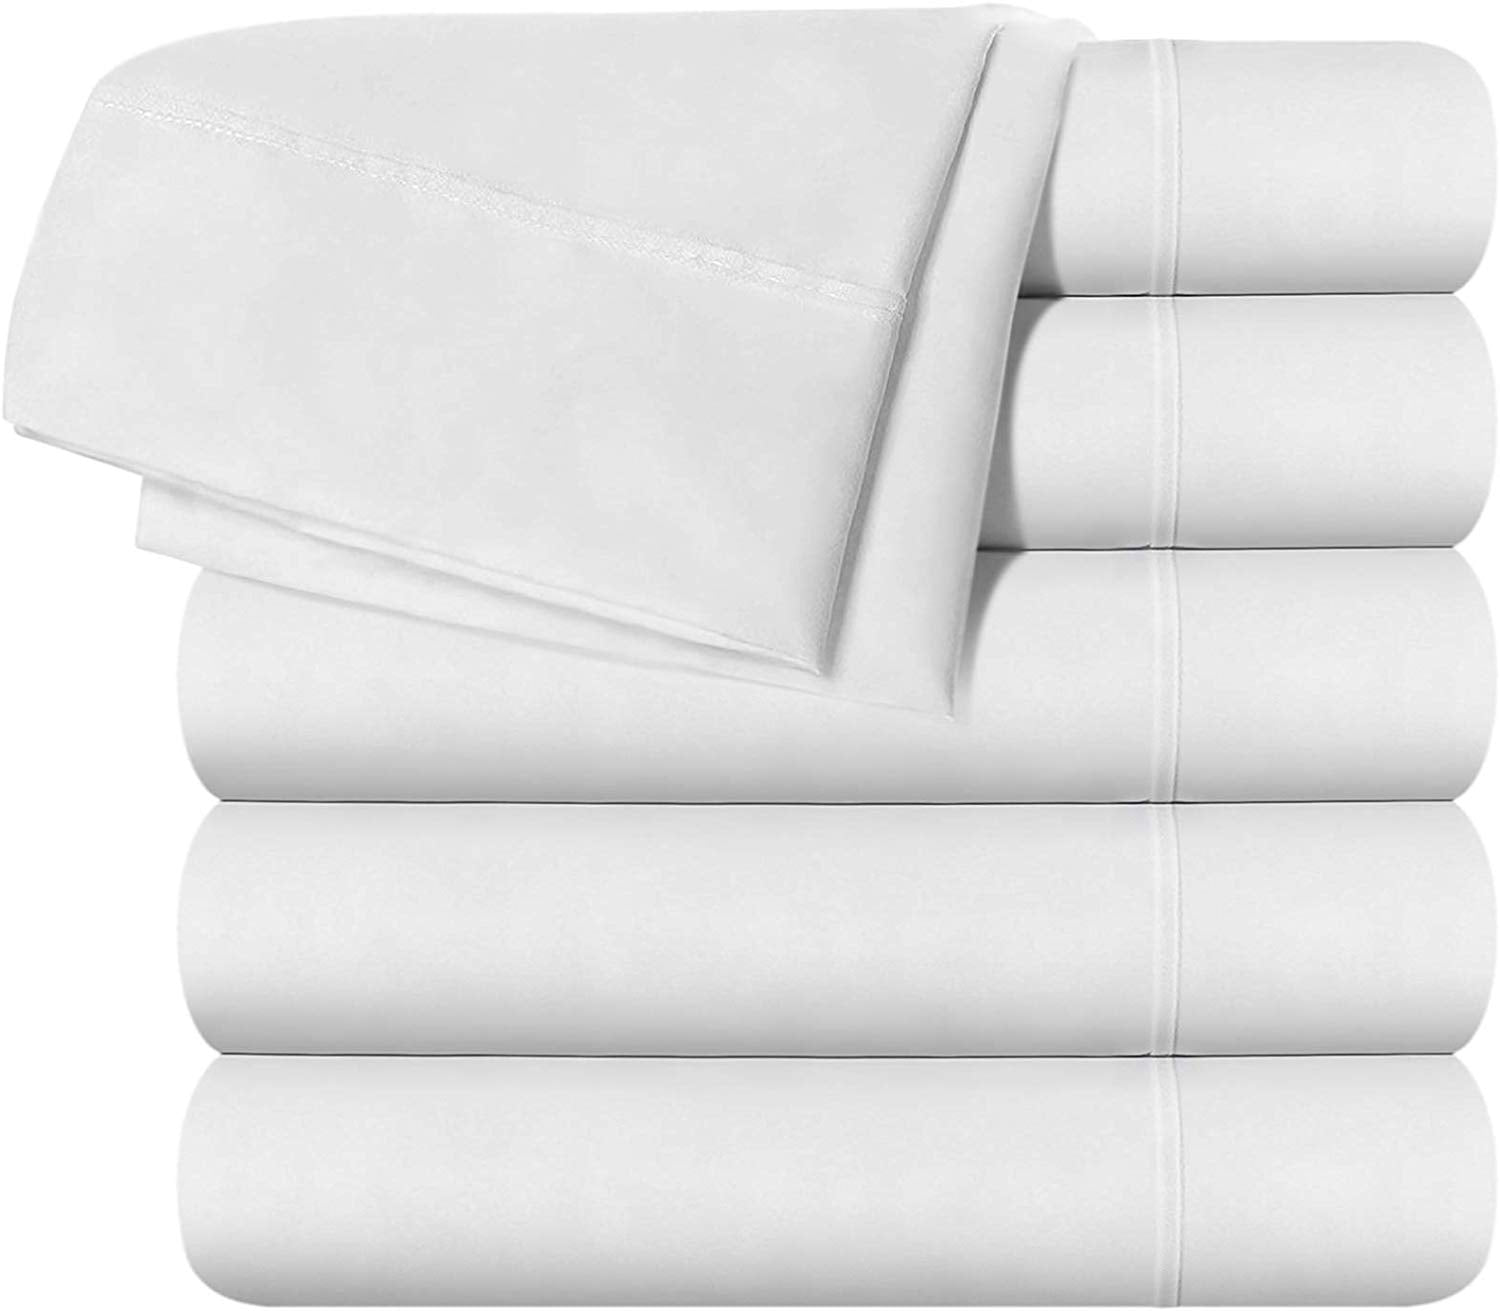 Utopia Bedding Full Bed Sheets Set - 4 Piece Bedding - Brushed Microfiber -  Shrinkage and Fade Resistant - Easy Care (Full, White)